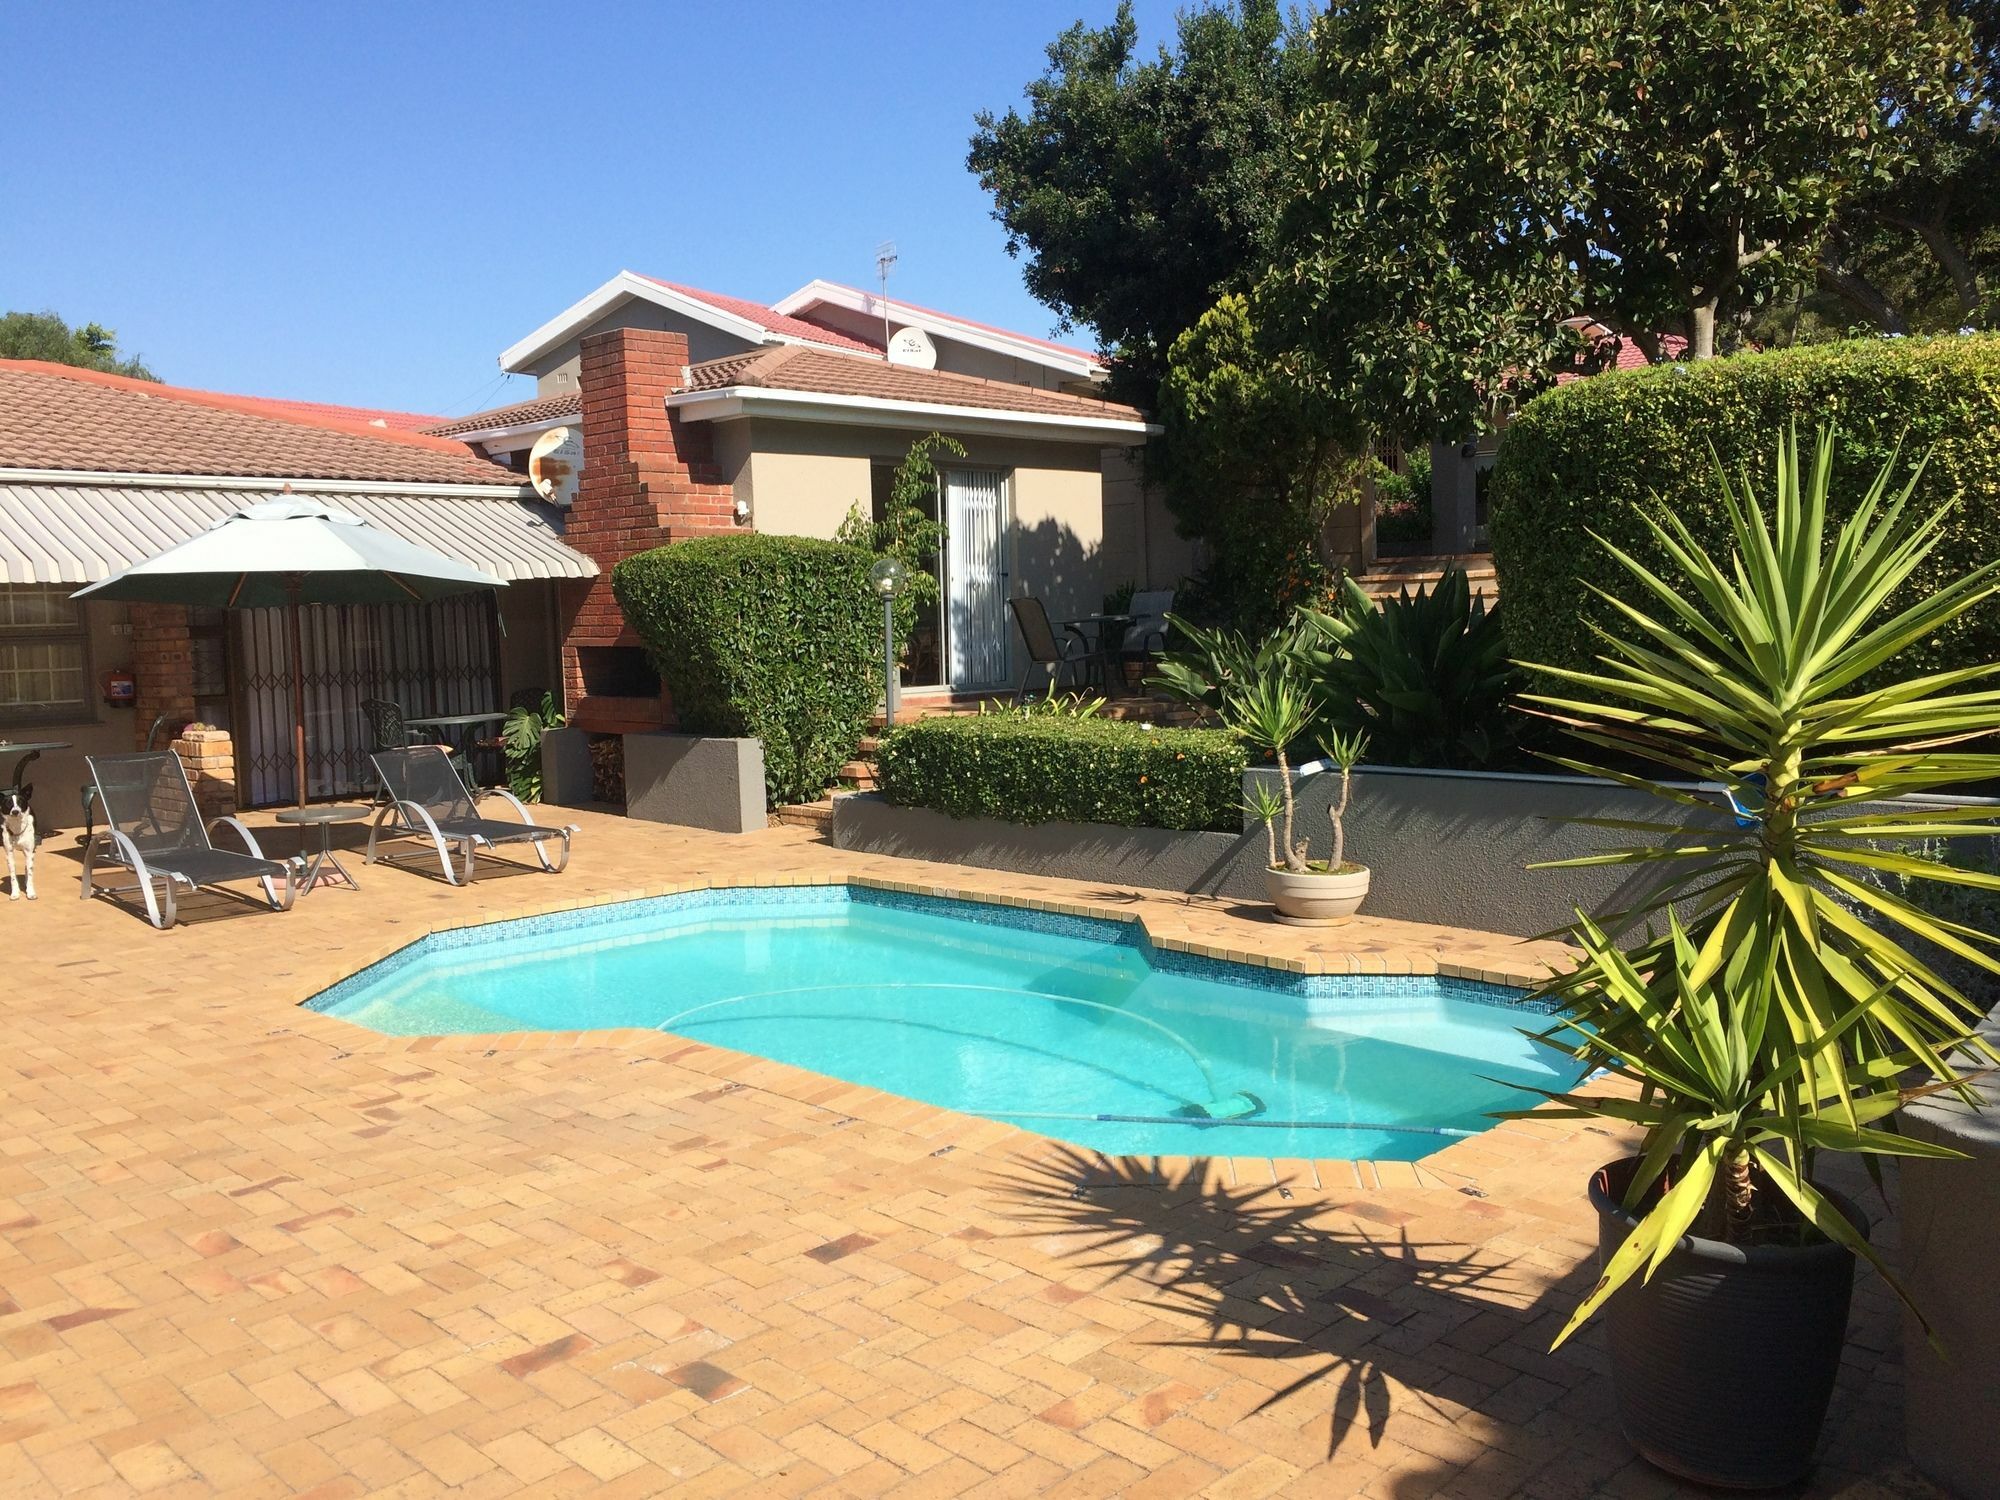 Maroela House Guest Accommodation Bellville Exterior foto